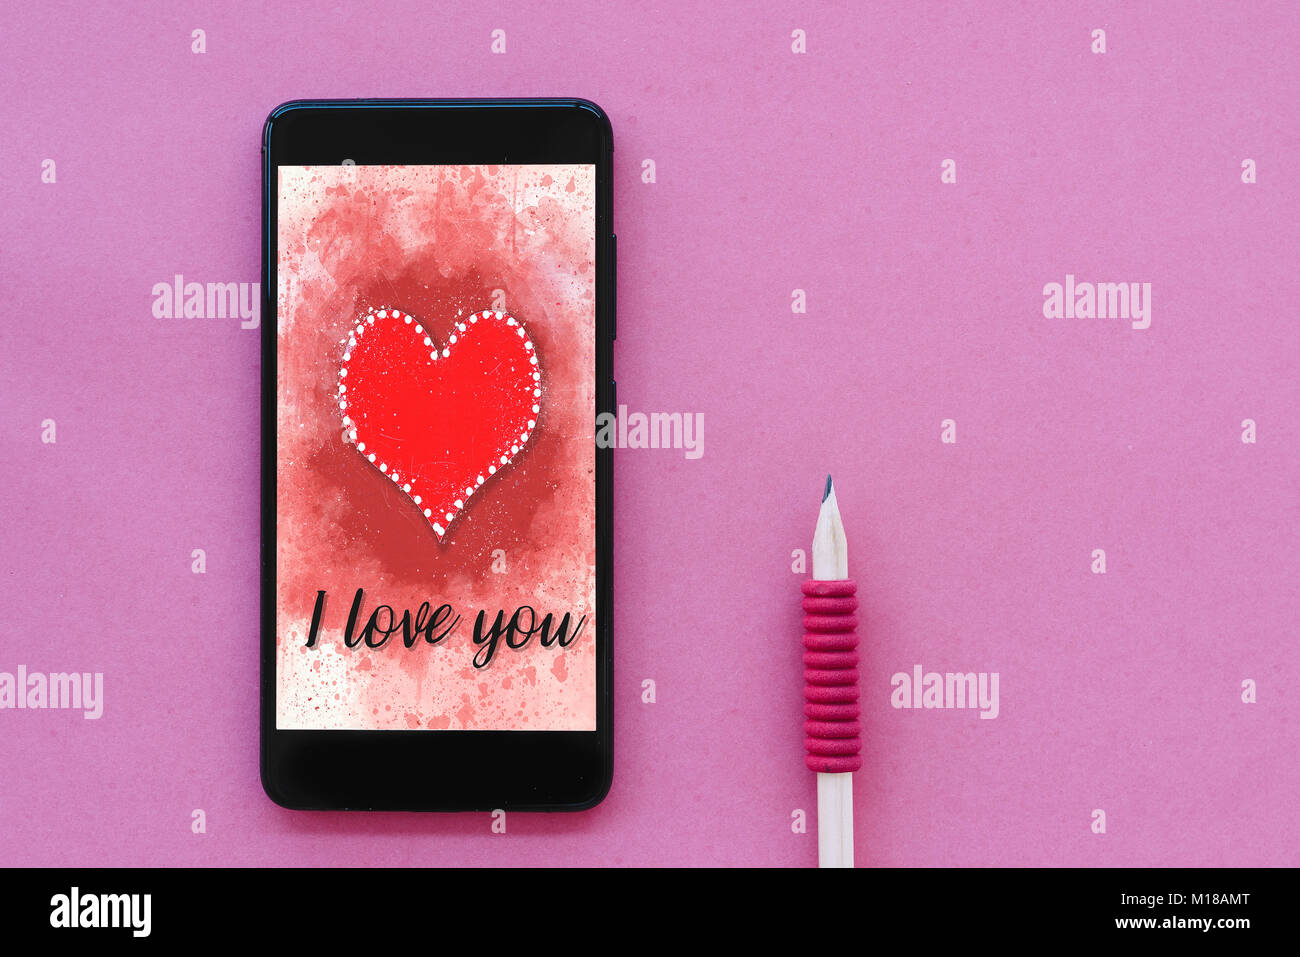 Valentines day sale background with heart illustration with the words I Love You on smartphone screen mockup on pink background with pencil. View from Stock Photo